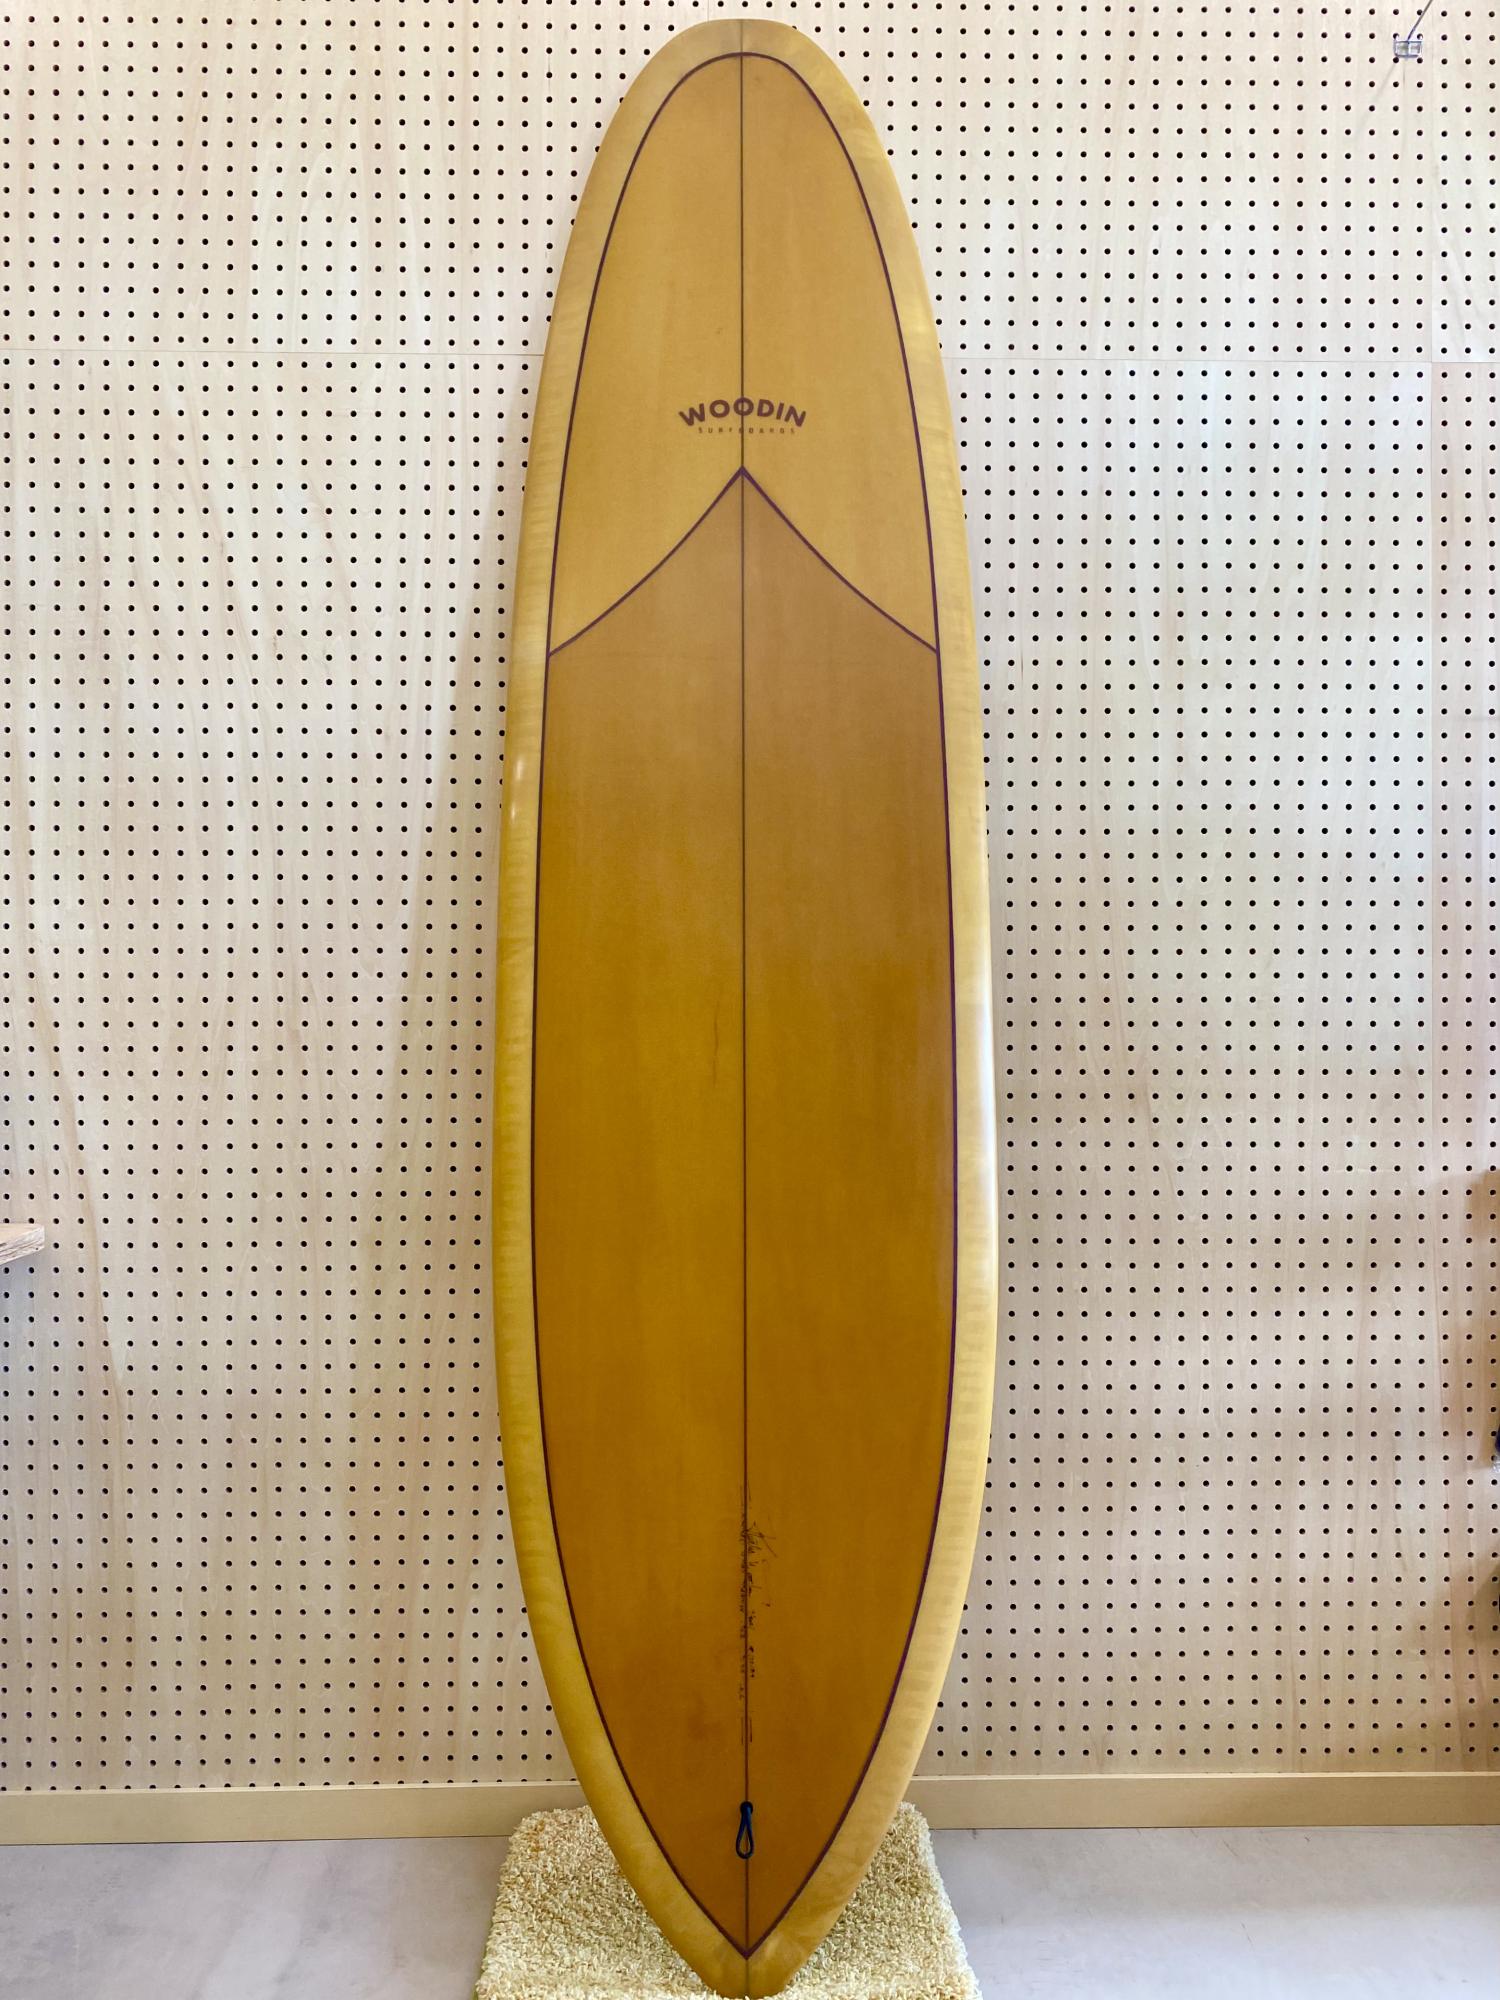 USED (Mindful Child model 7.4 abst WOODIN SURFBOARDS)